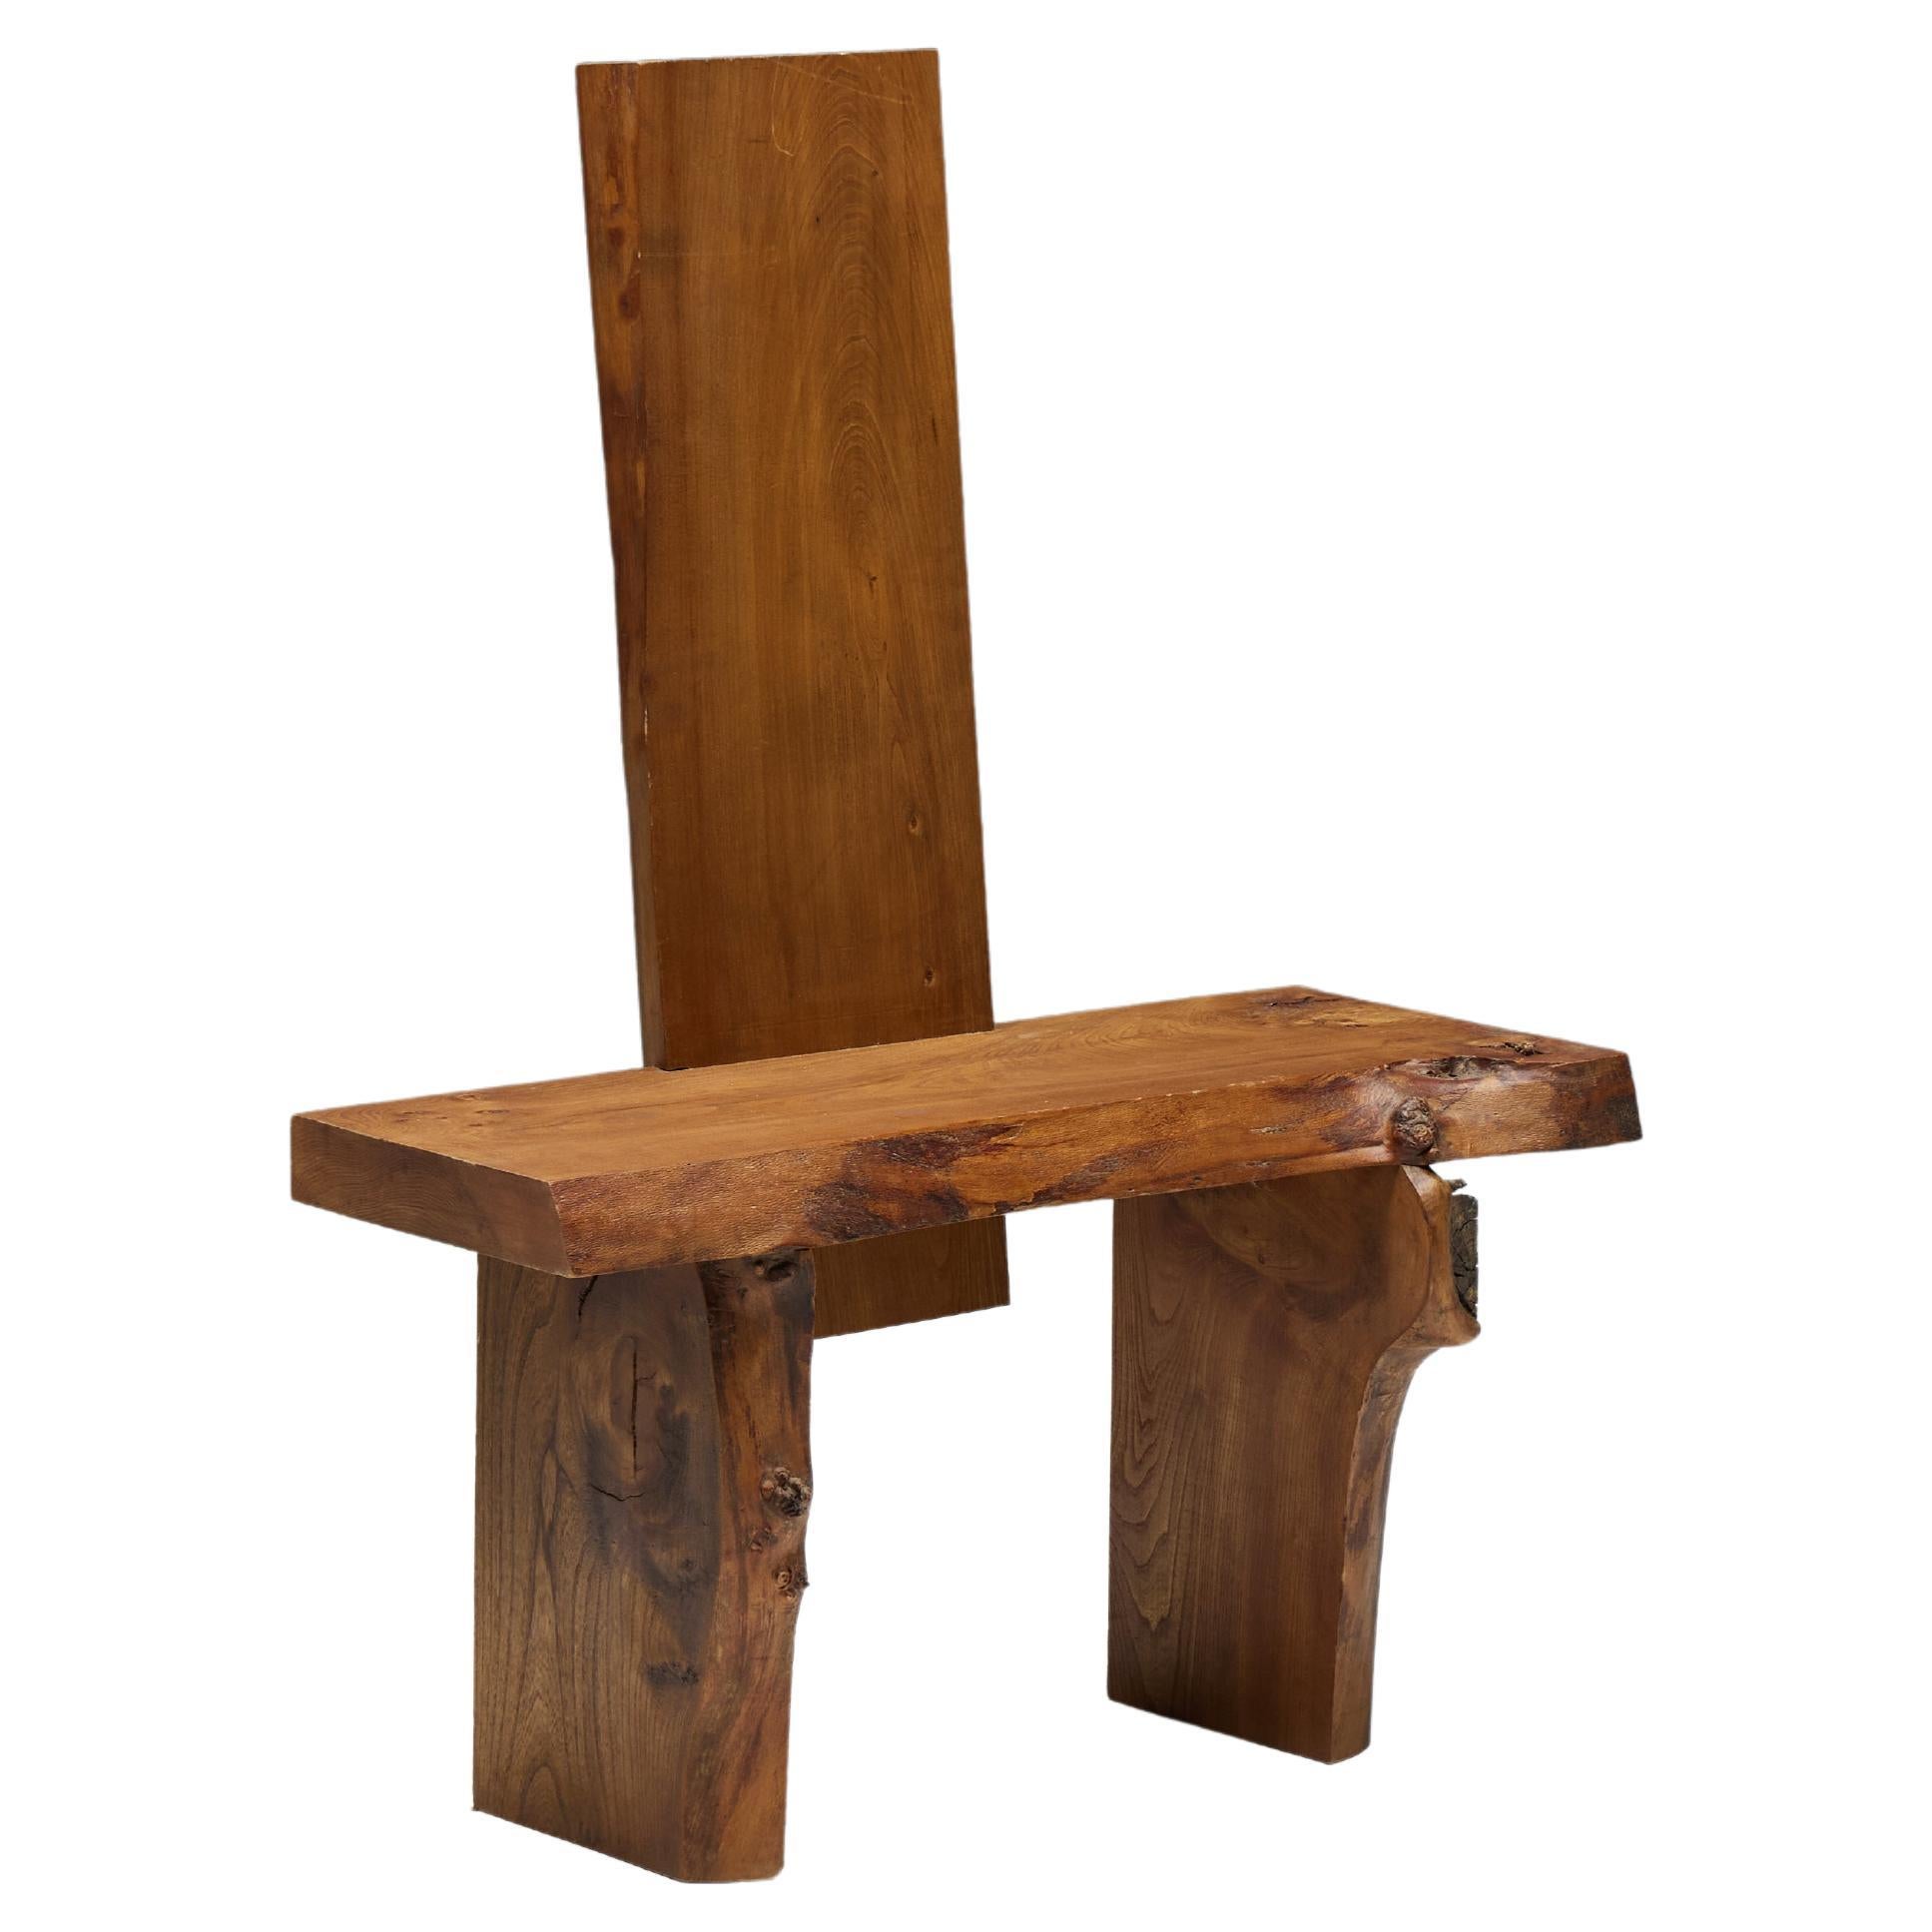 Brutalist Monoxylite Chair, France, 1950s For Sale